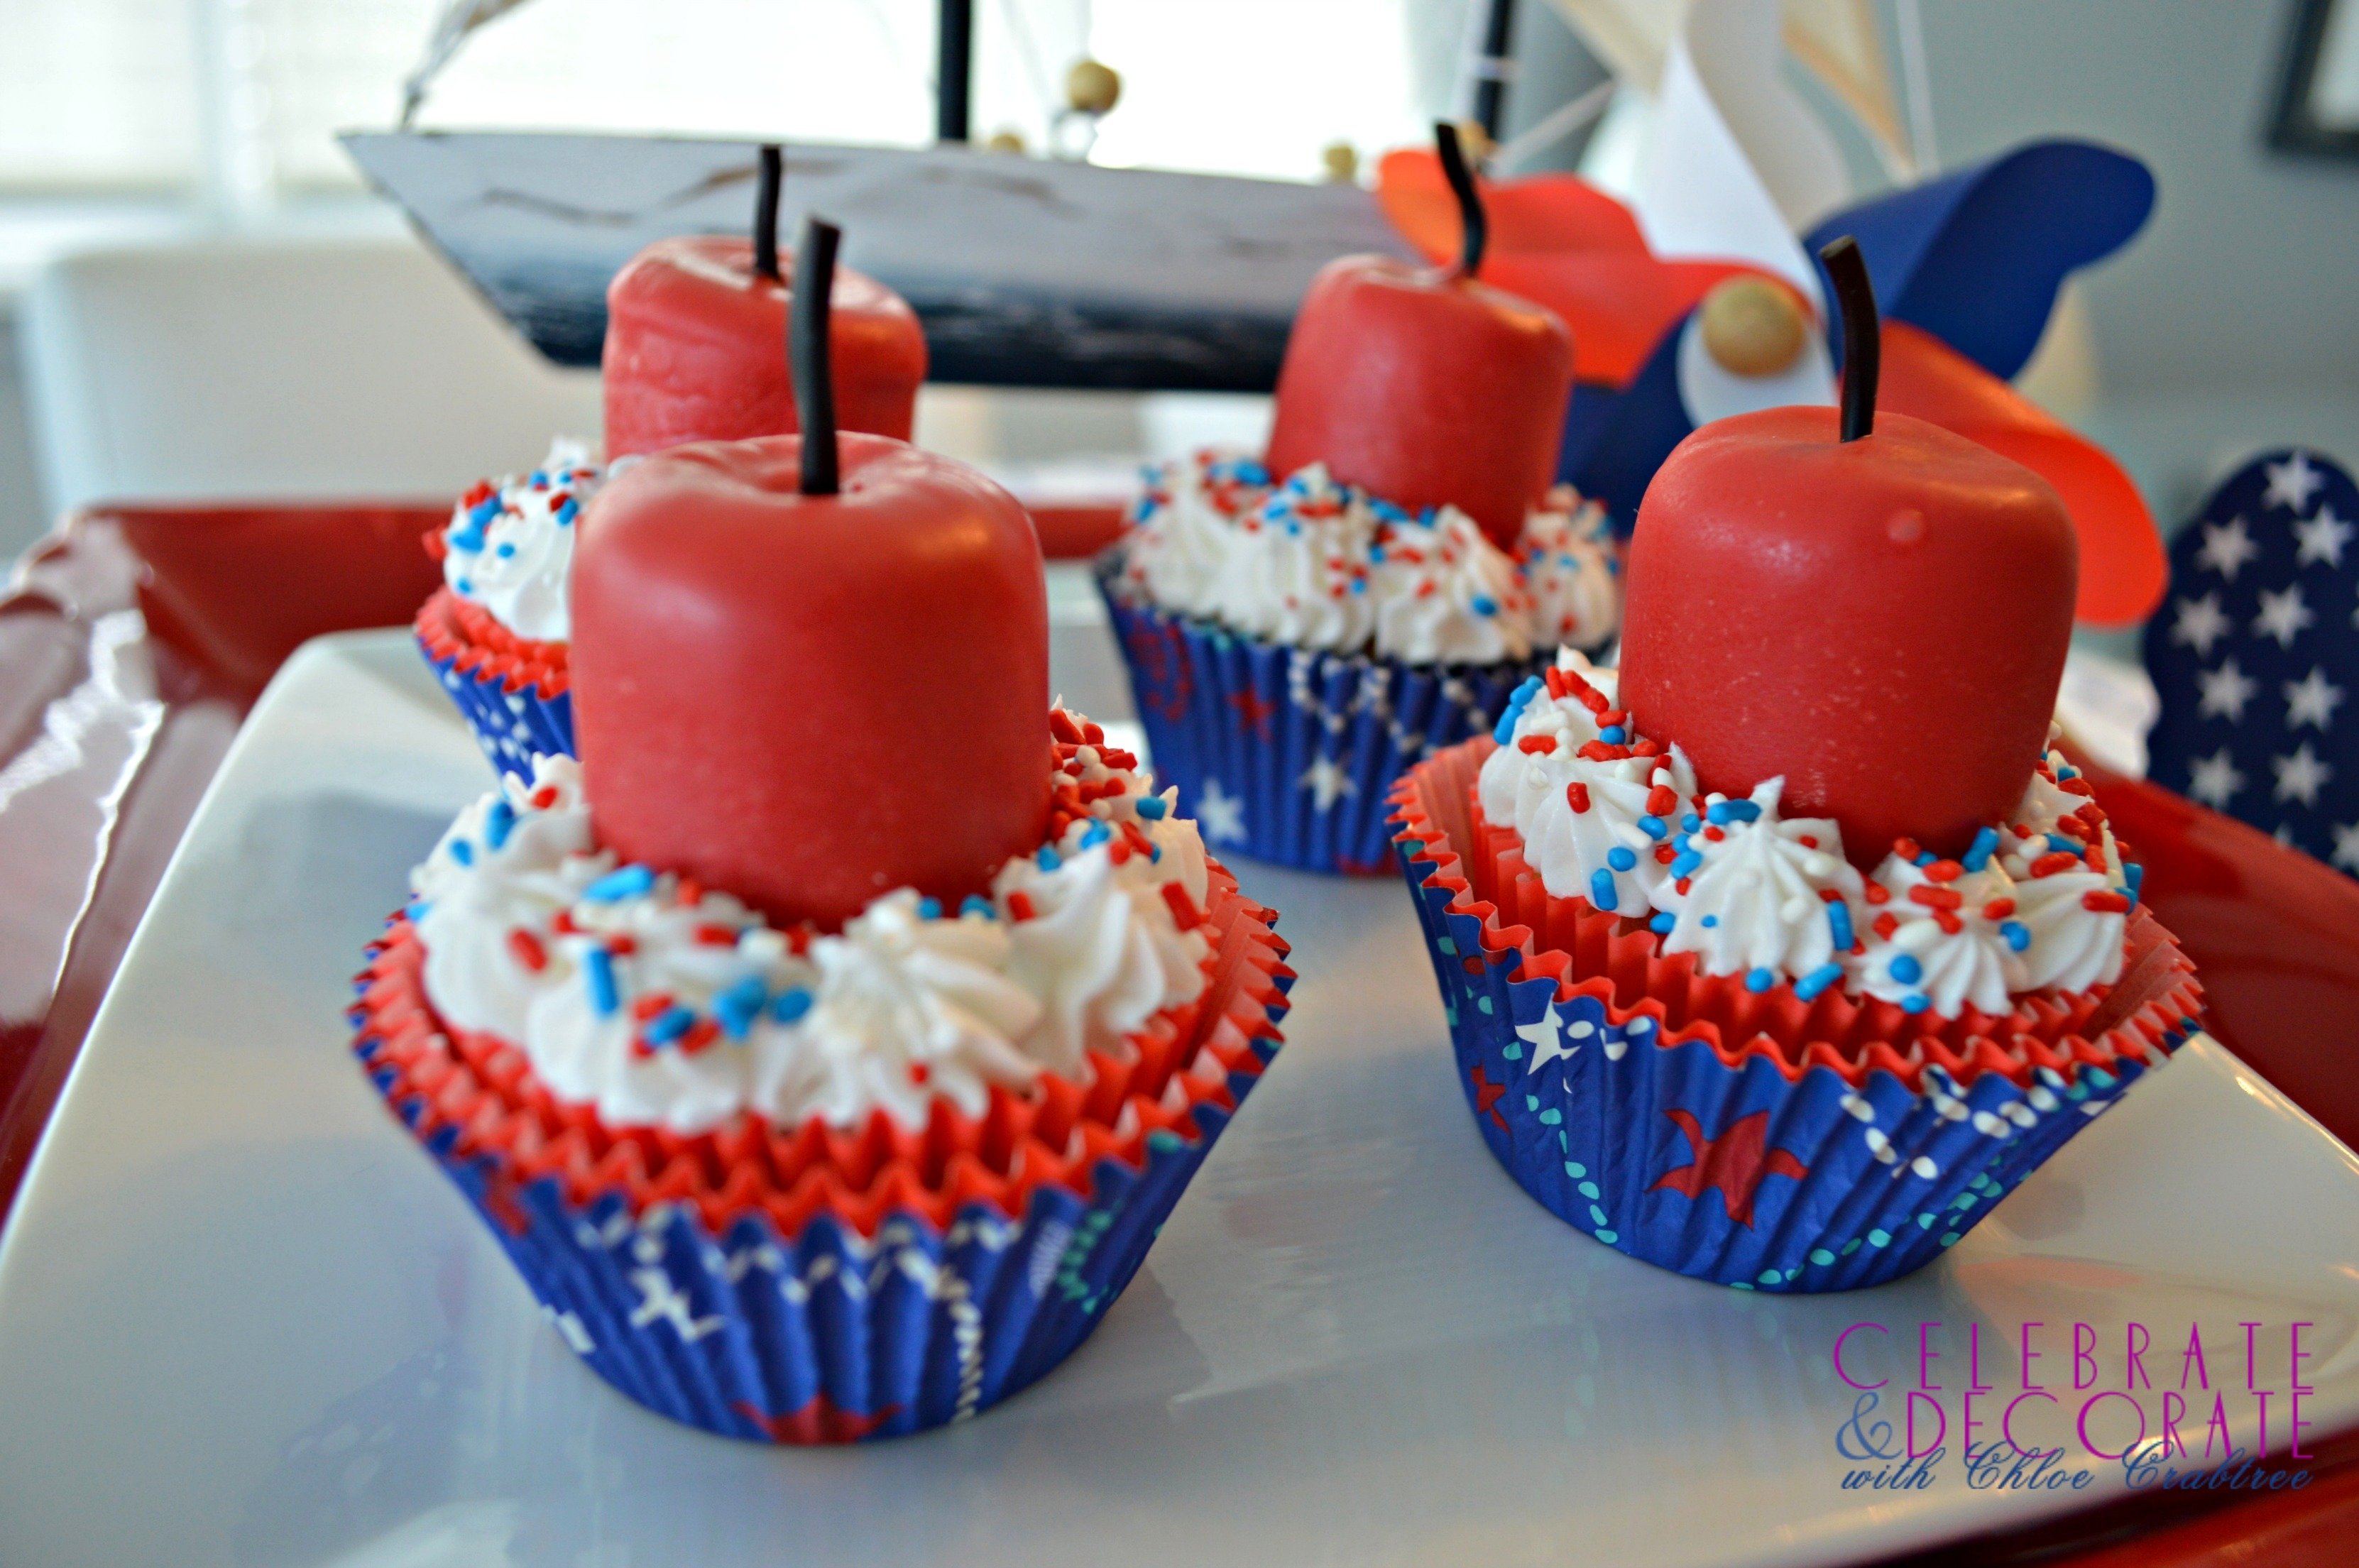 10 Wonderful 4Th Of July Cupcake Ideas fourth of july firecracker cupcakes celebrate decorate 1 2022